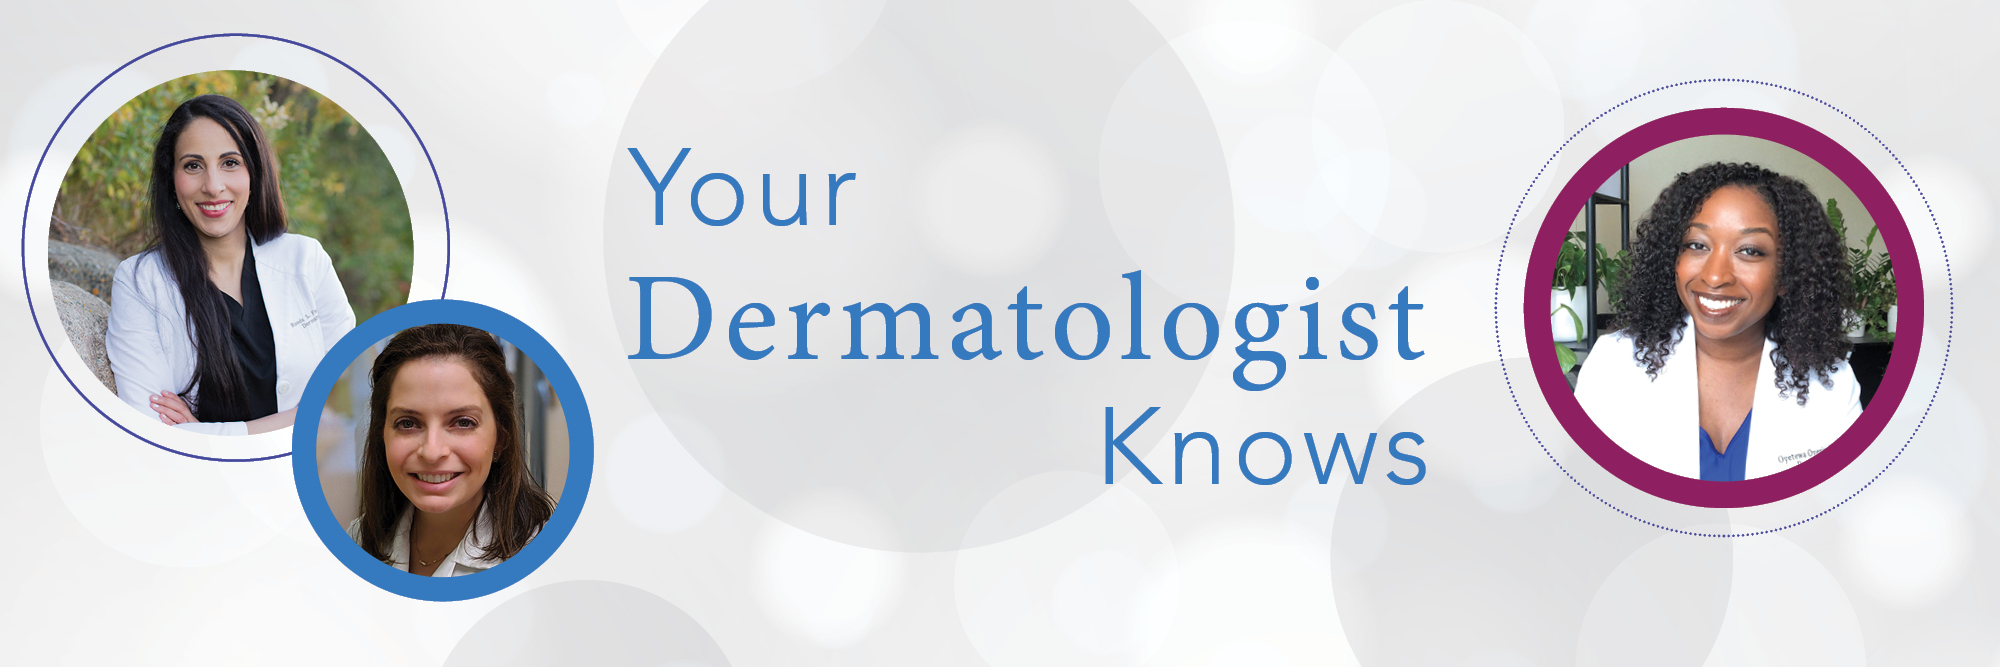 Banner illustration for Impact Report on Your Dermatologist Knows